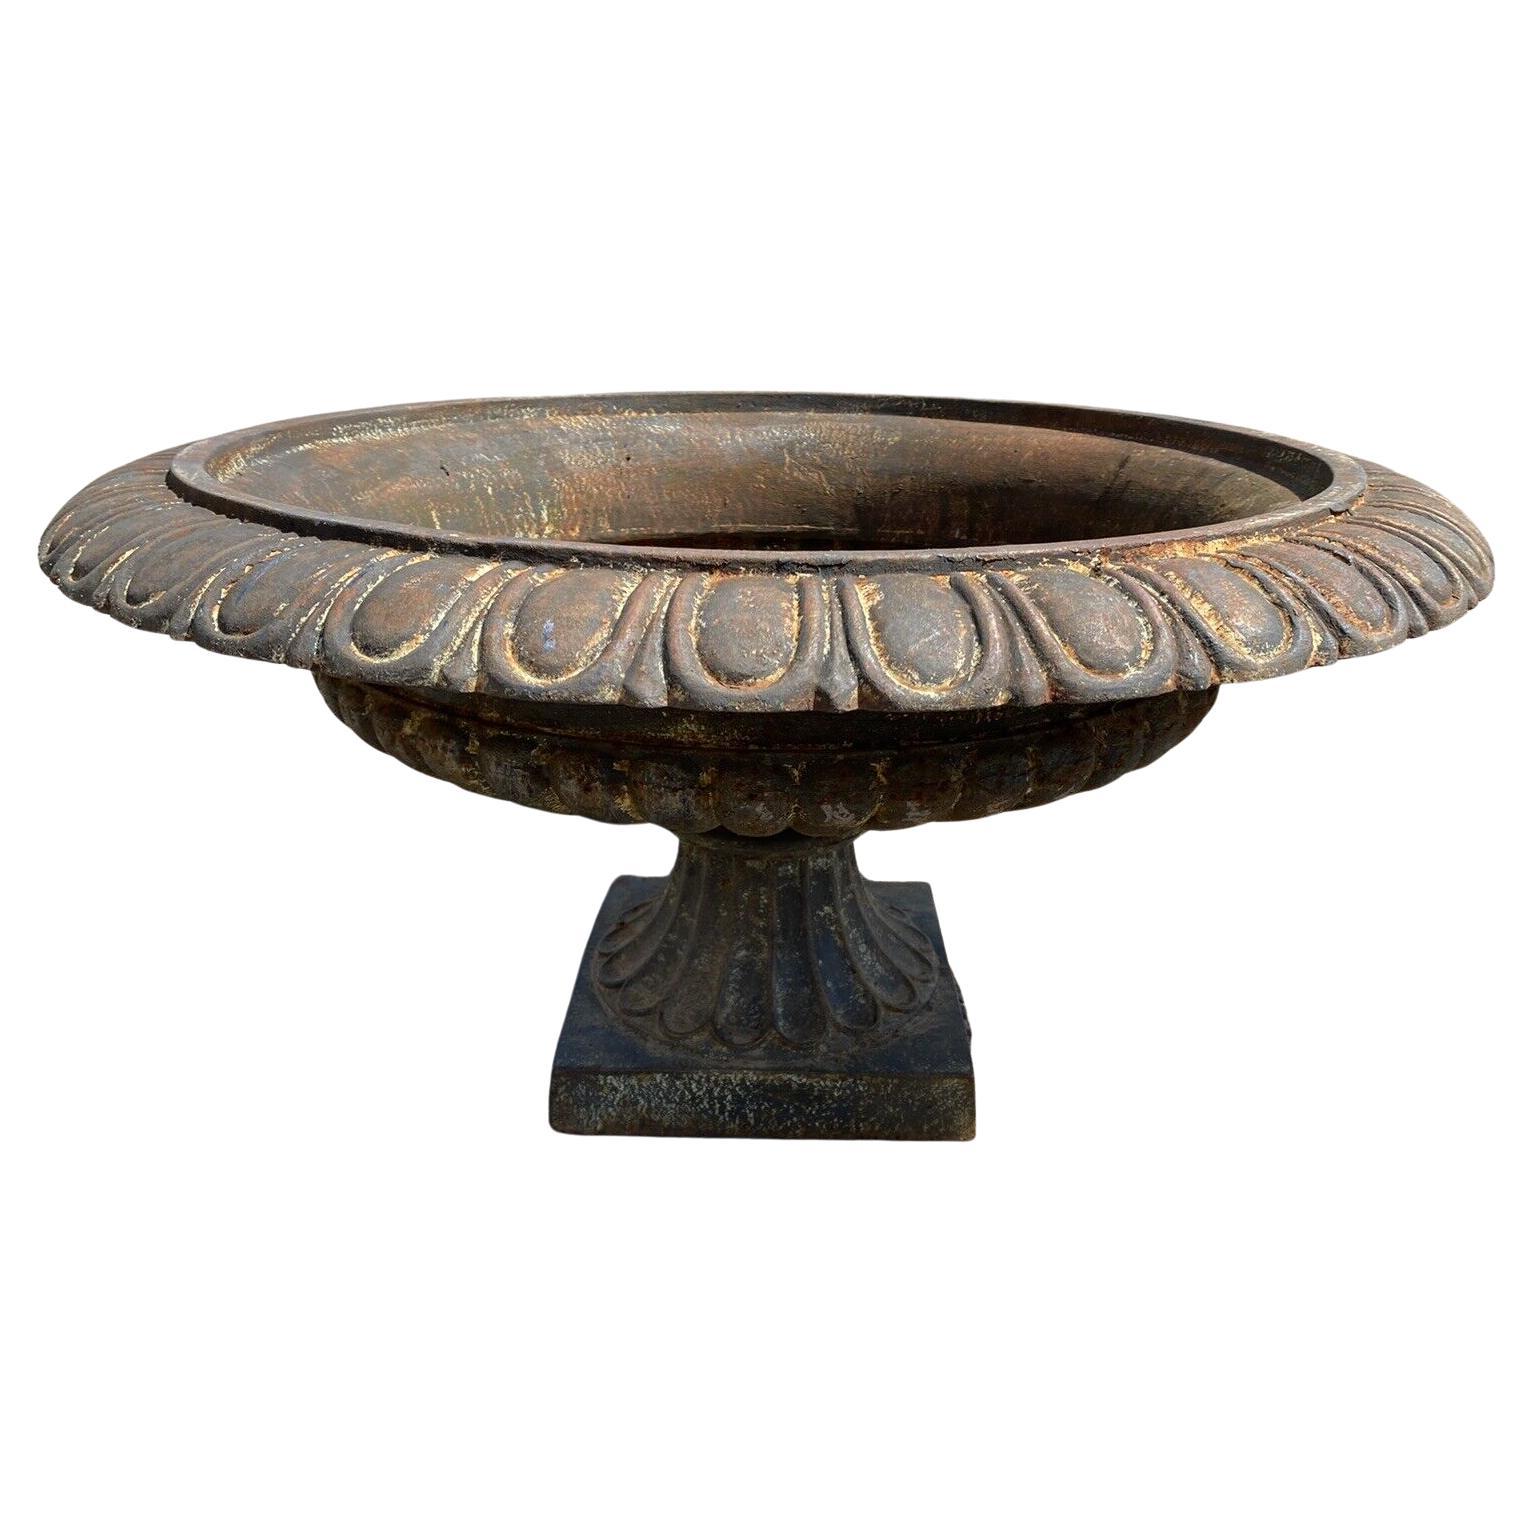 Cast Iron Low and Wide Round French Classic Style Outdoor Garden Urn Planter